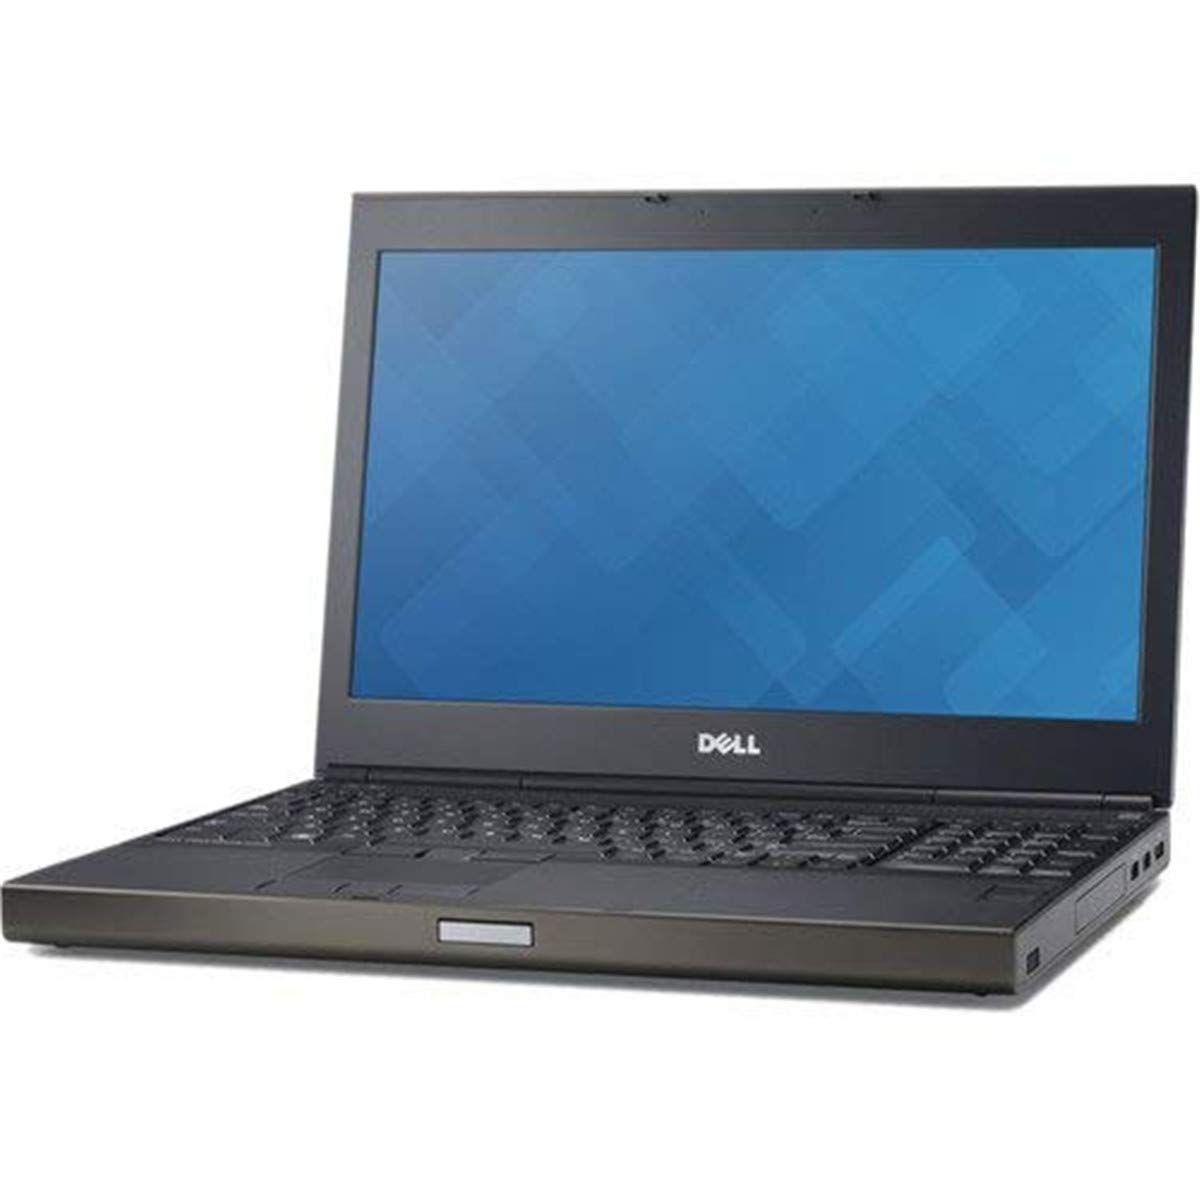 2019 Dell M4800 15.6in FHD Mobile Workstation Business Laptop Computer, Intel Quad-Core i7-4800MQ Up to 3.7GHz, 16GB RAM, 500GB HDD, DVDRW, 802.11AC WiFi, Bluetooth, Windows 10 Professional (Renewed)